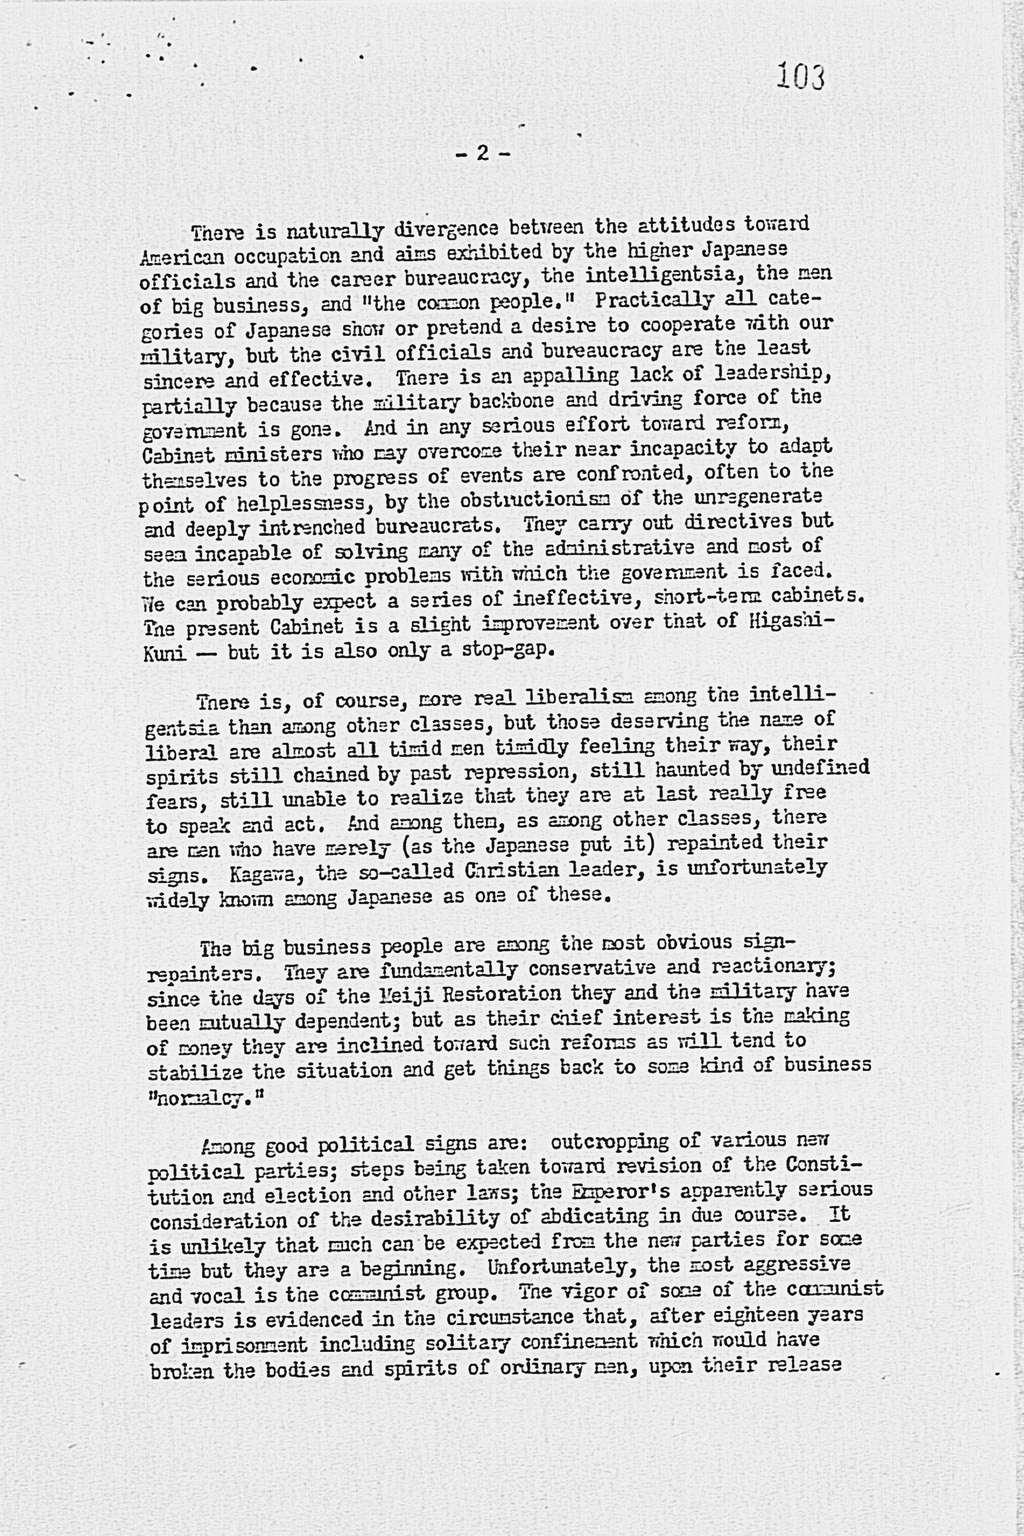 『Letter from George Atcheson, Jr. to the President dated November 5, 1945.』(拡大画像)